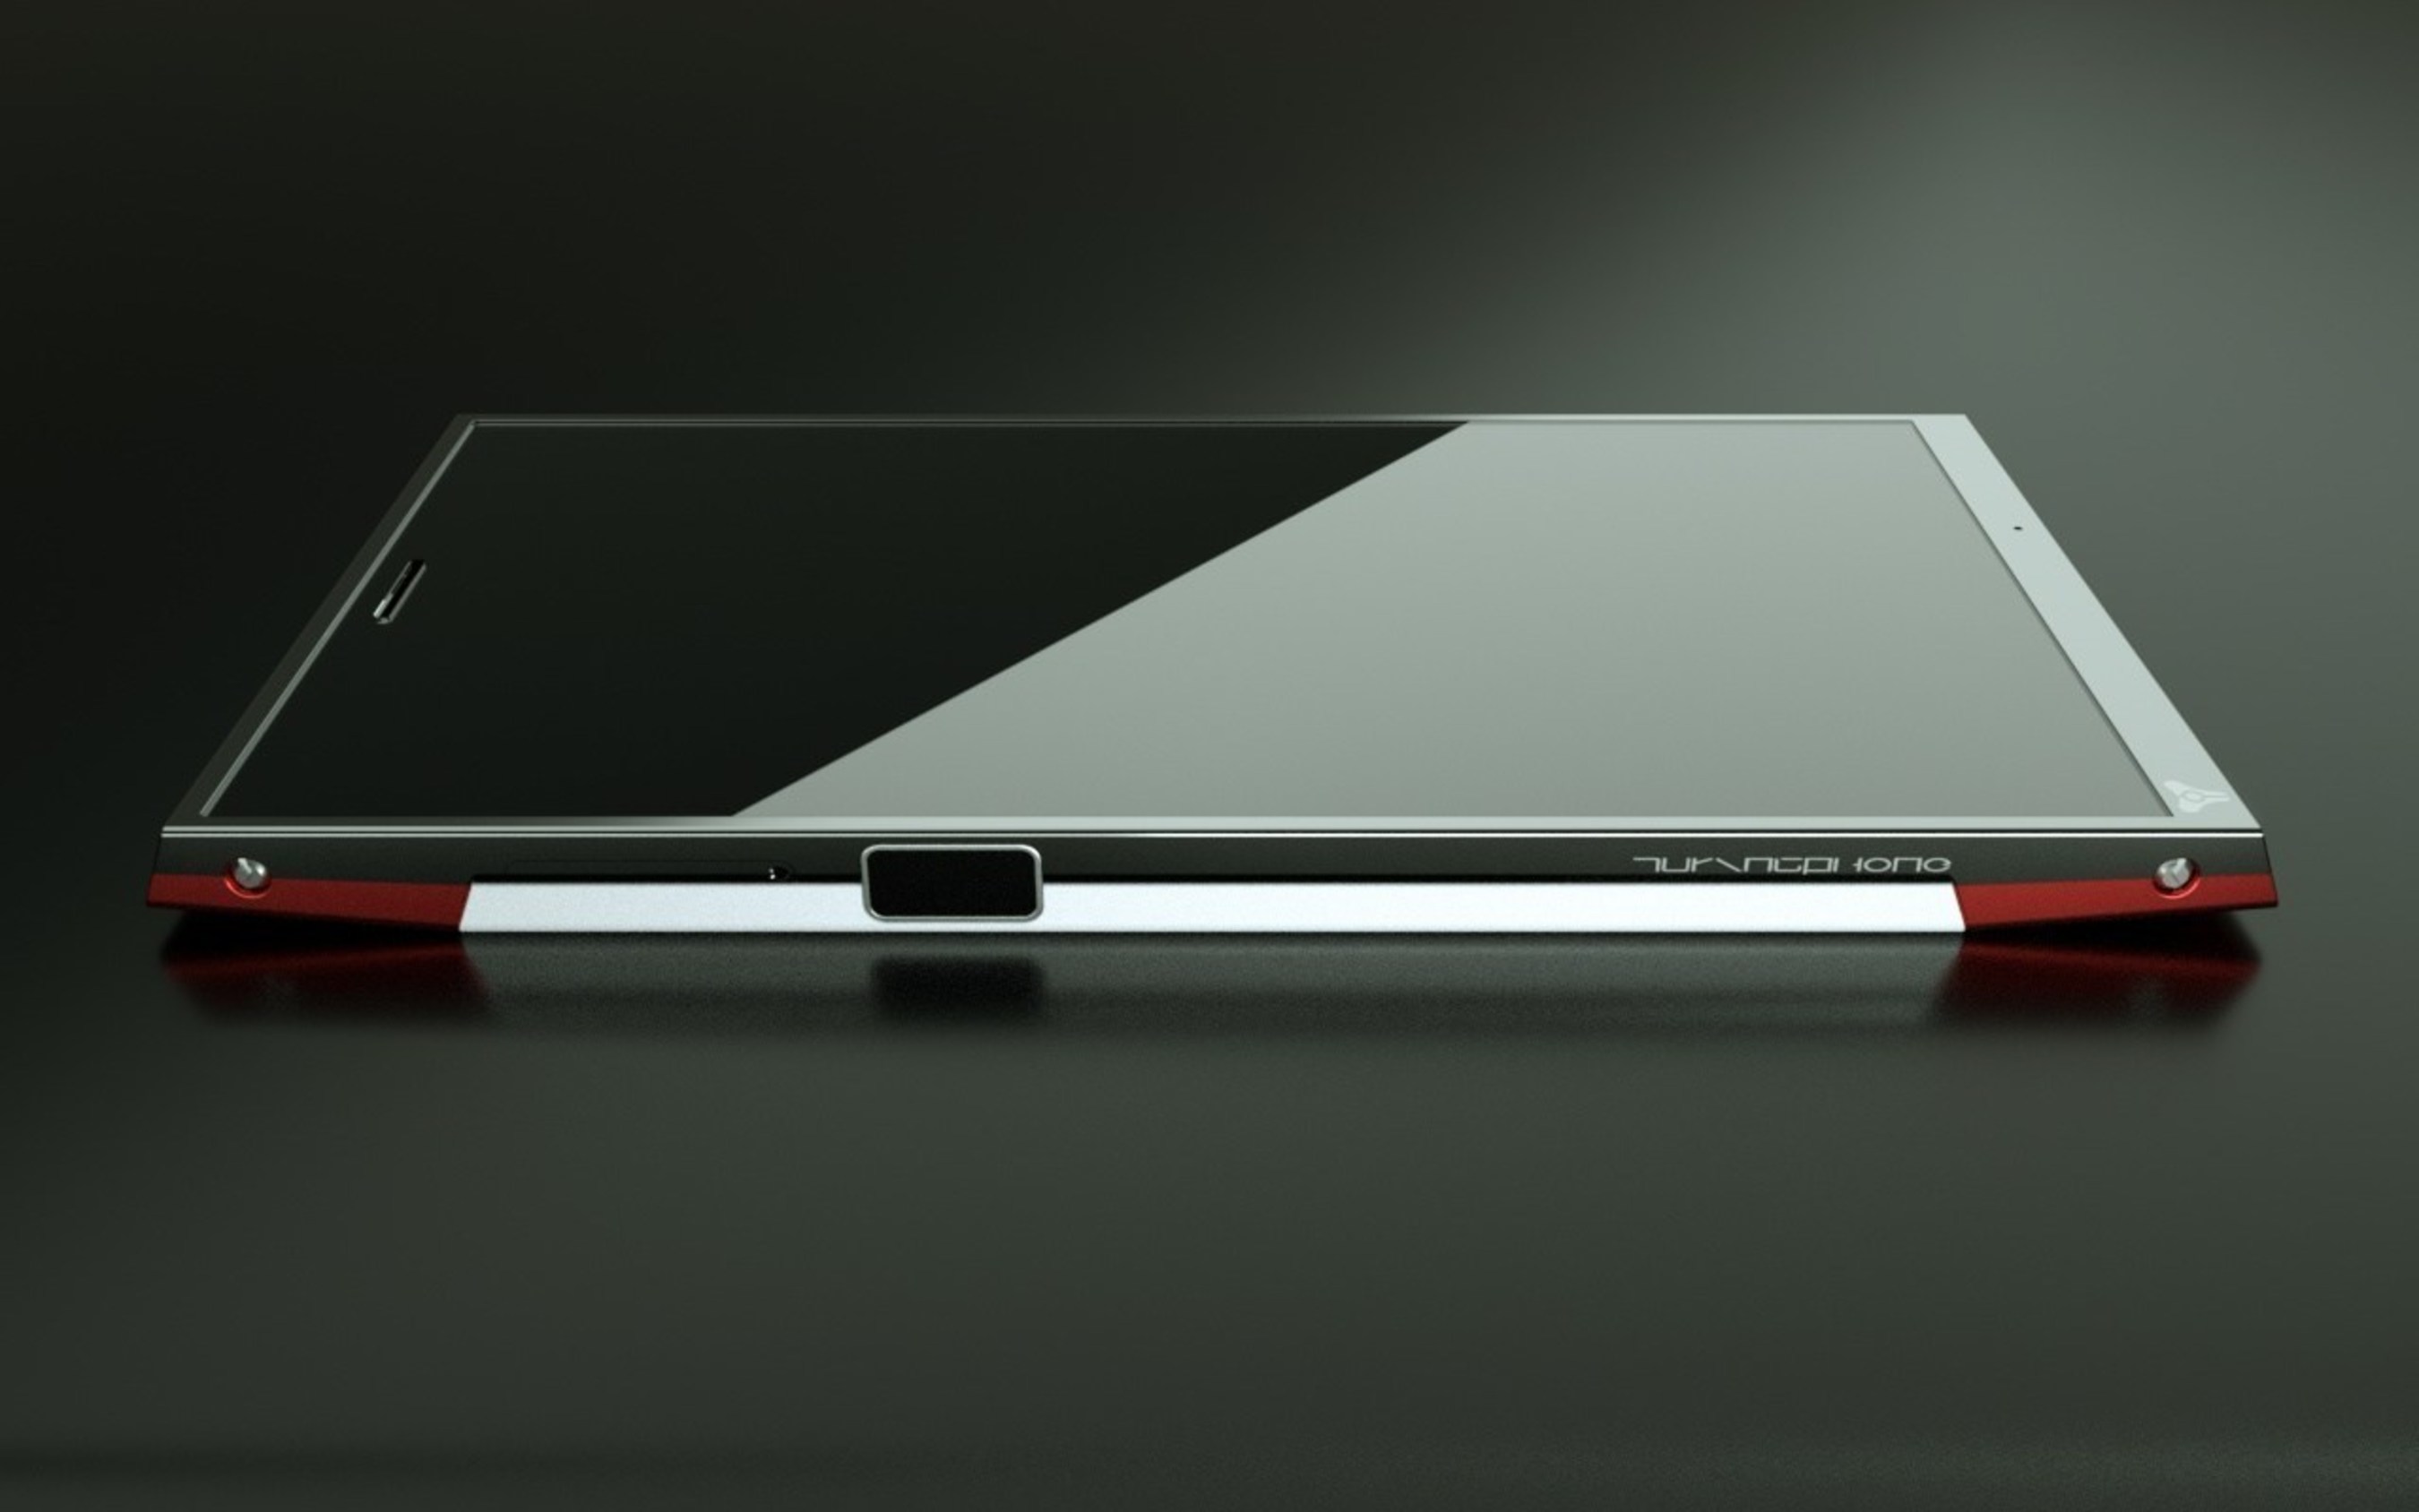 Side view of Turing Robotic Industries' Turing Phone.